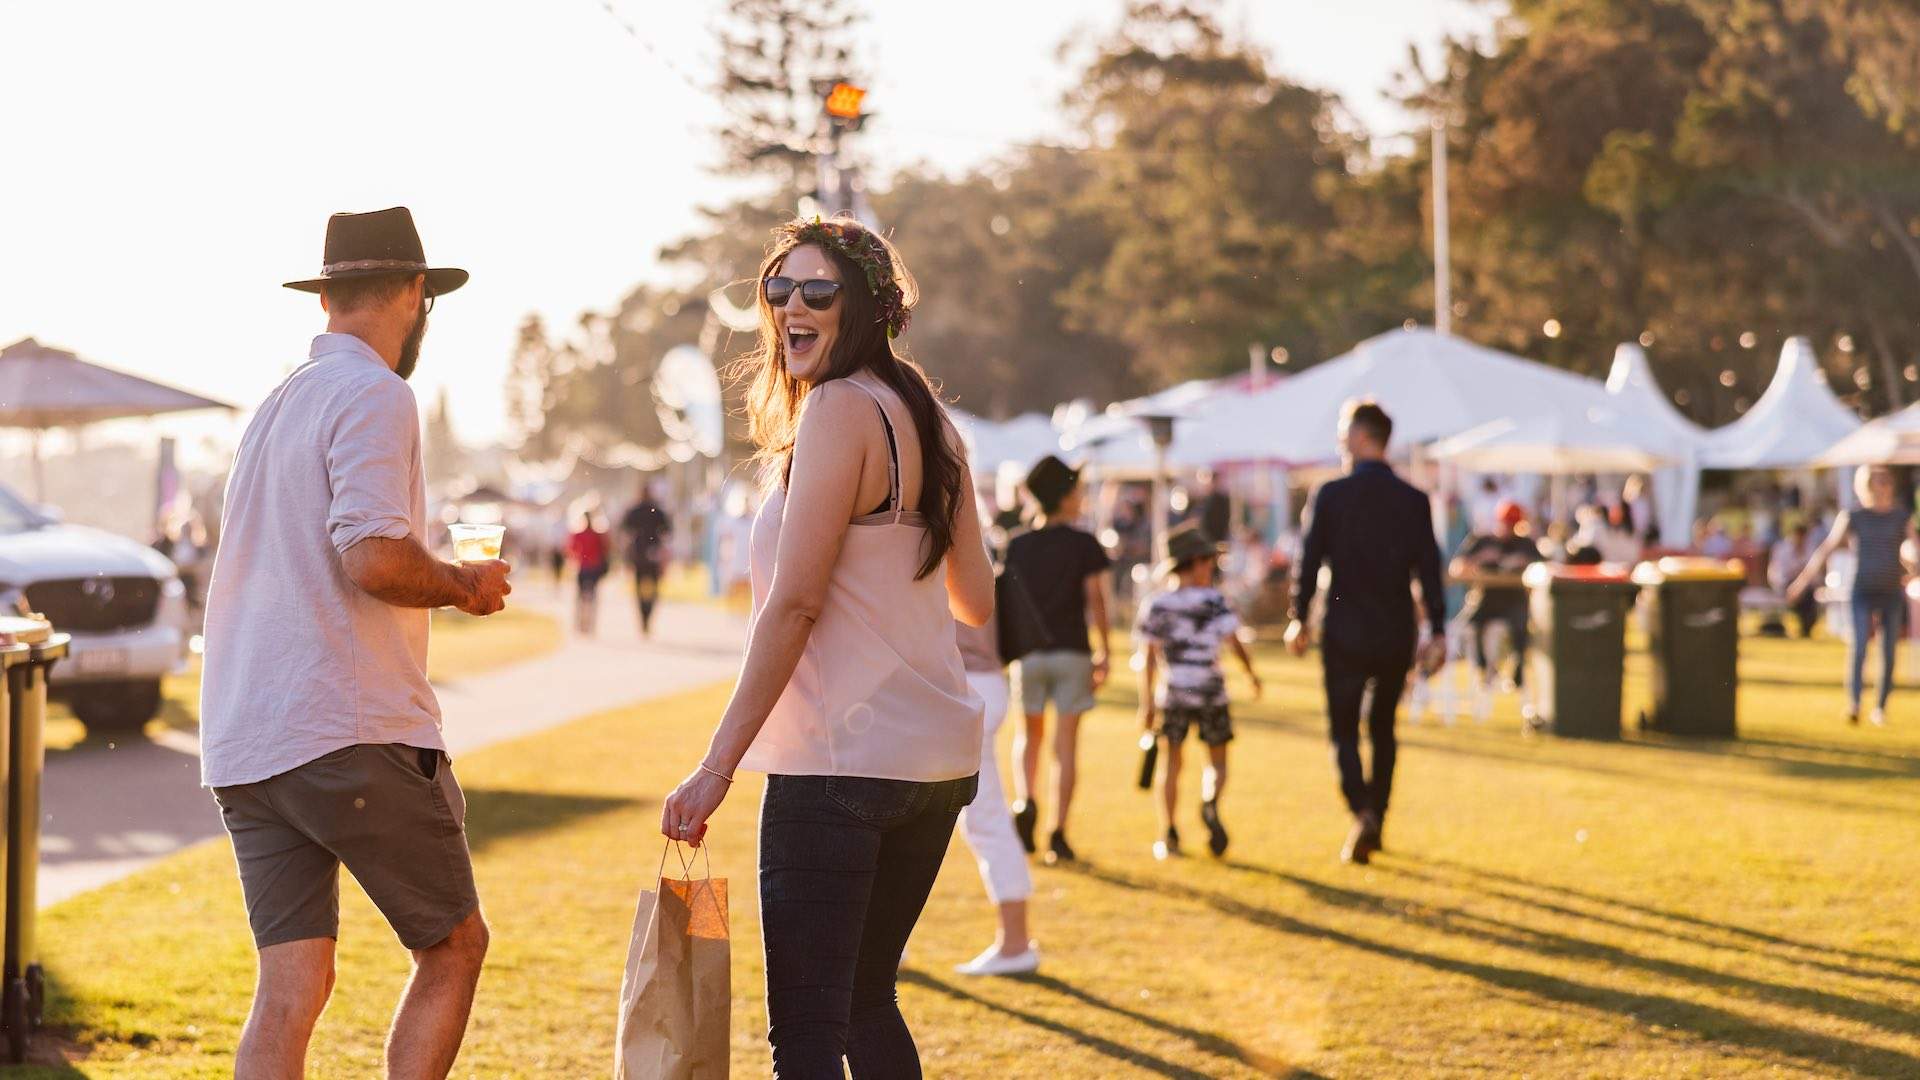 The Gourmand's Guide to the Most Delicious Food and Drink Events Coming to Queensland